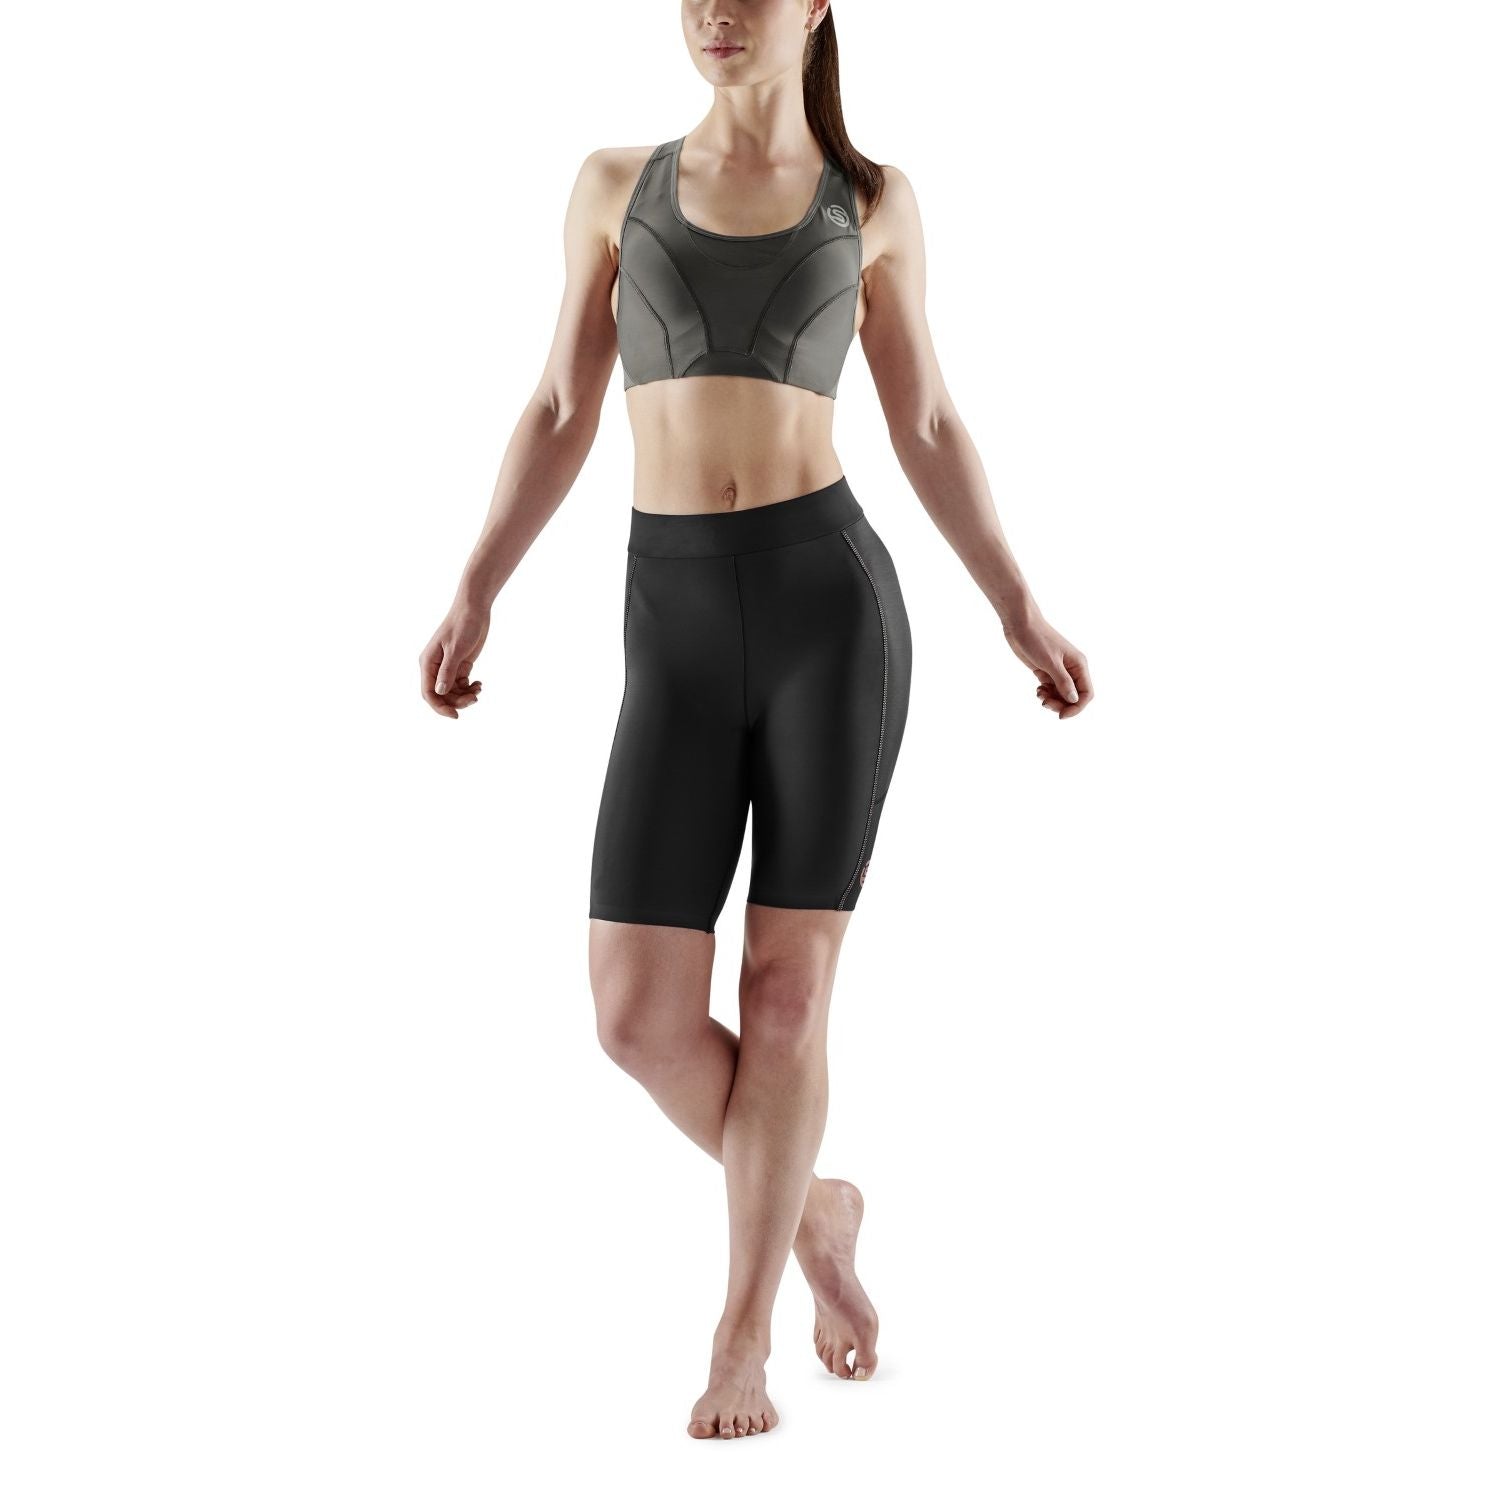 Skins Compression Women's Series-5 Long Tights